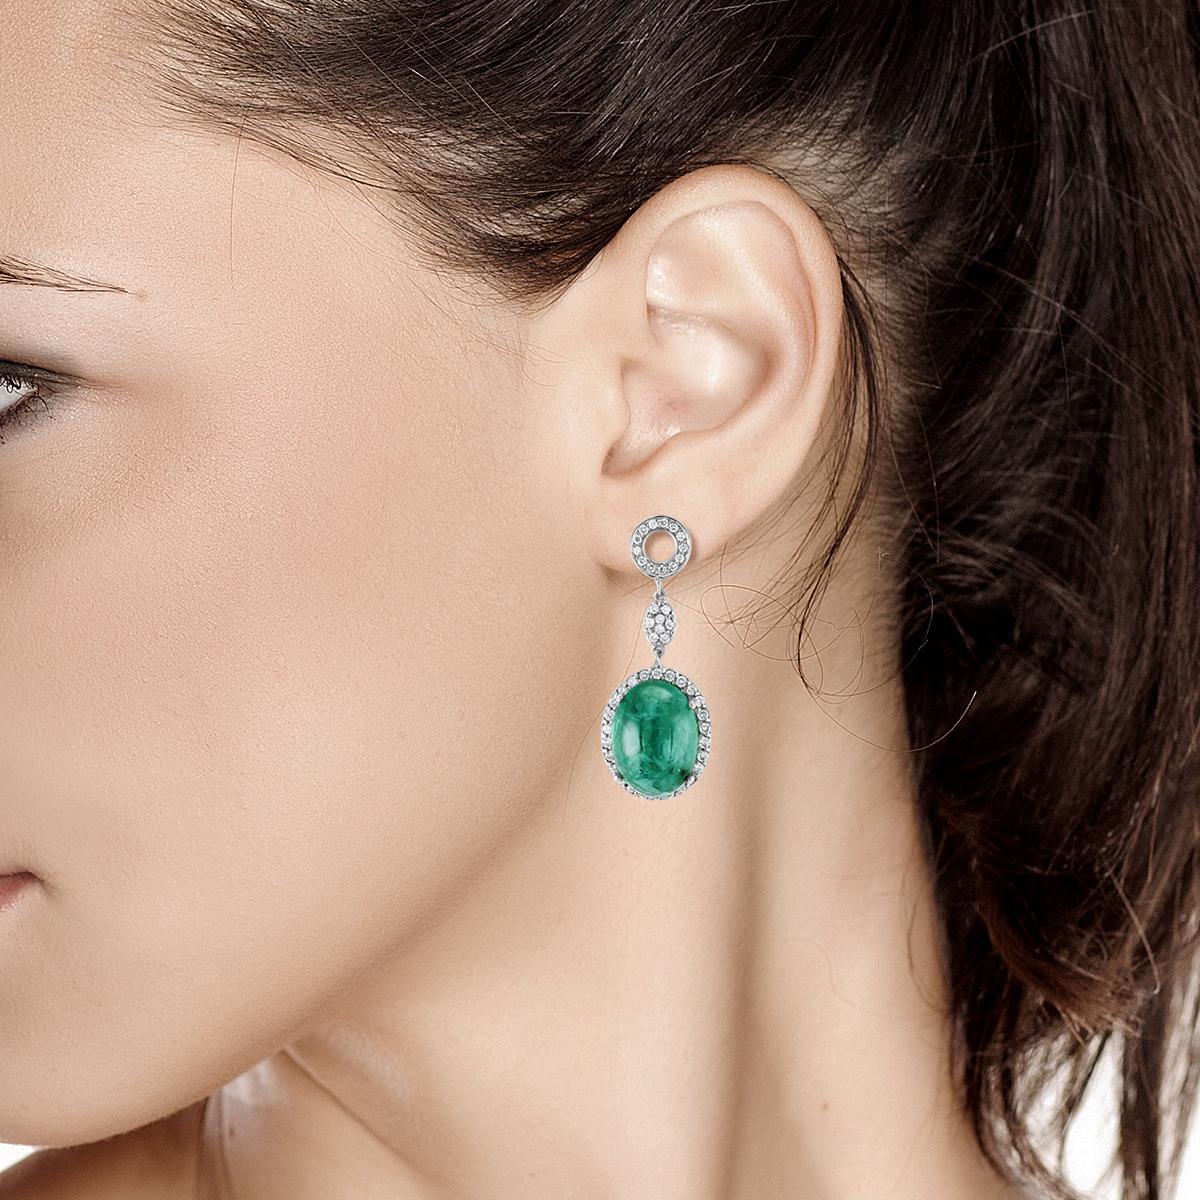 Women's Cabochon Emerald and Diamond Drop White Gold Earrings Weighing 14.21 Carat